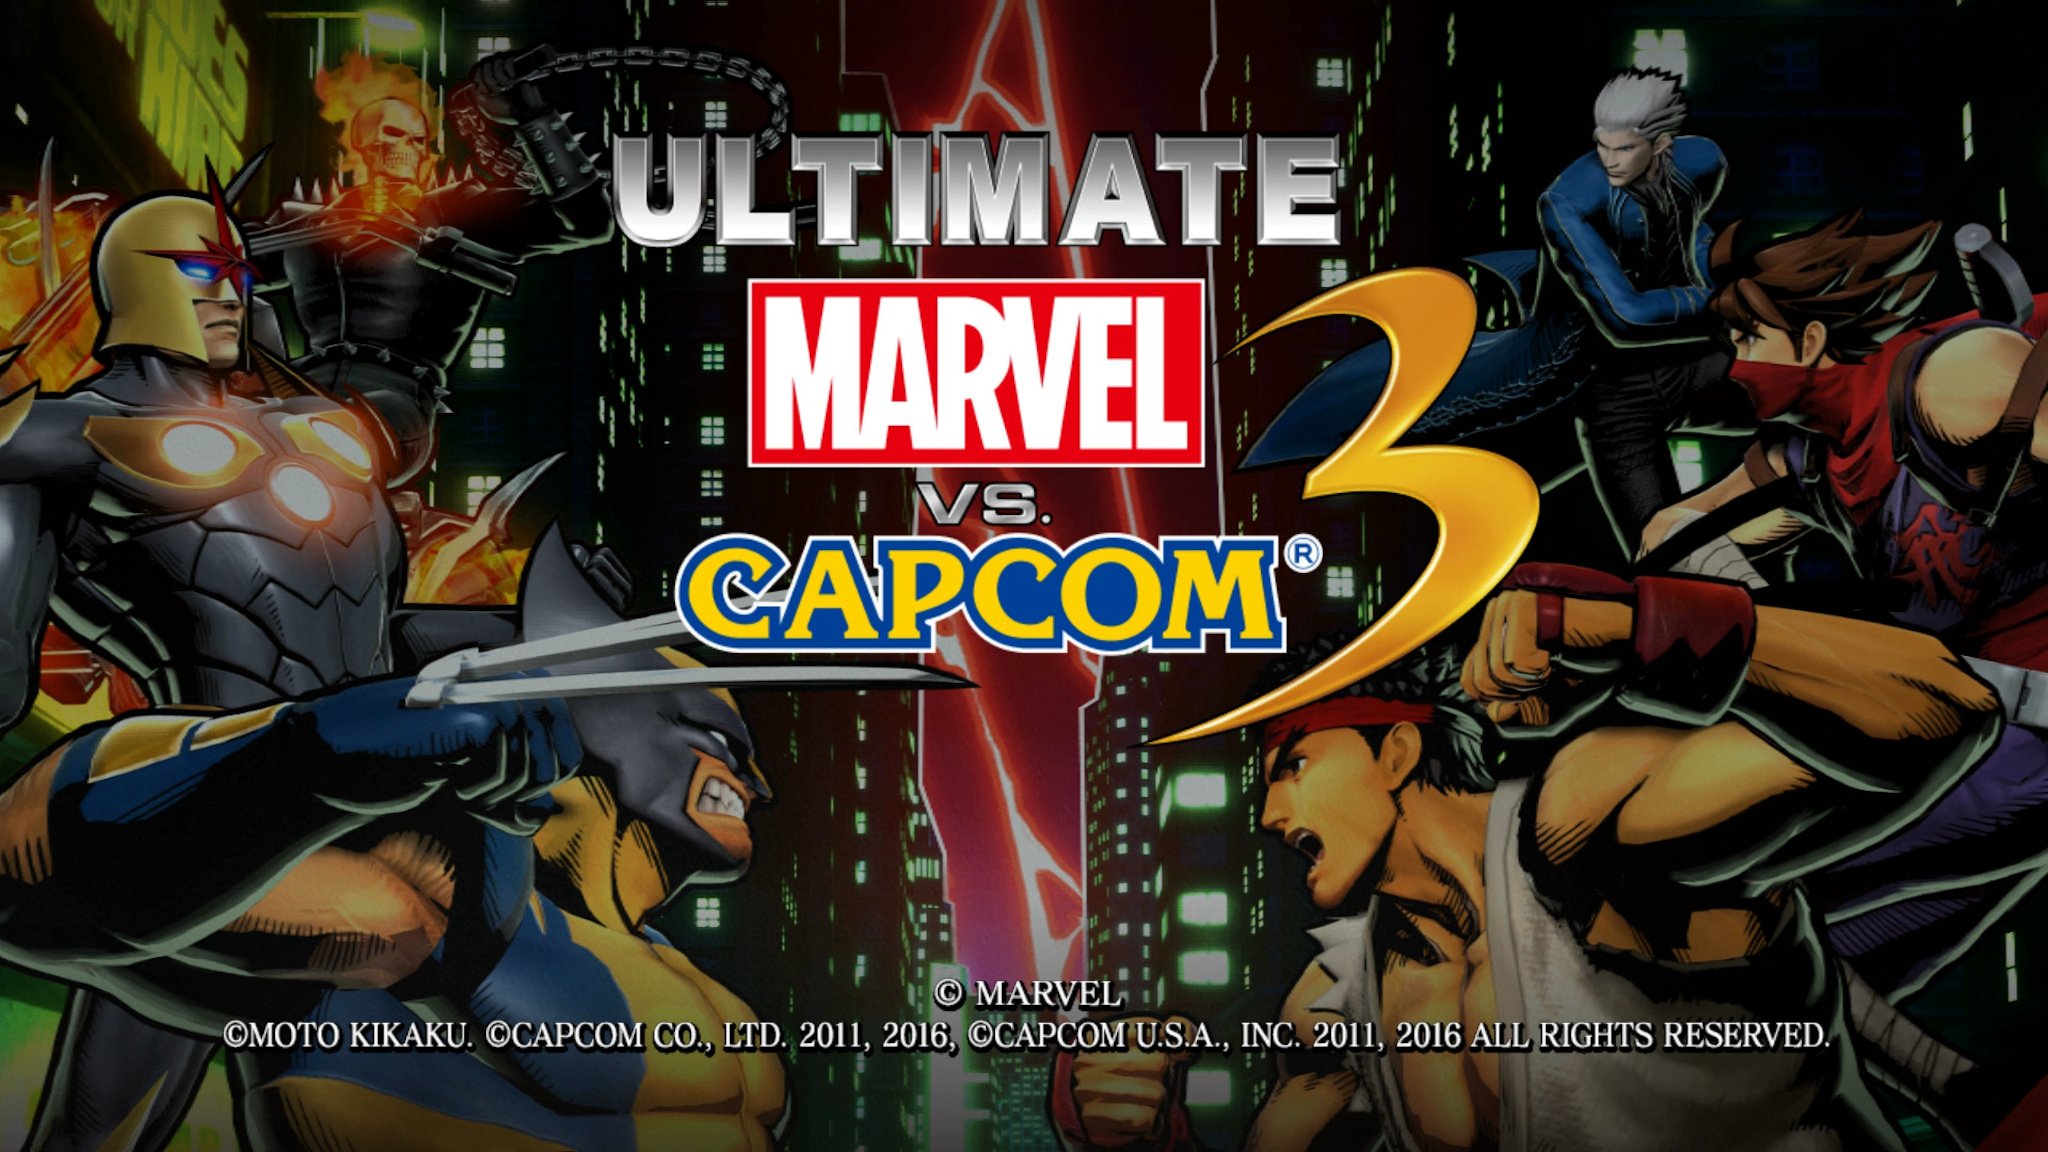 Ultimate Marvel vs. Capcom 3 review: Xbox One's flashiest fighting